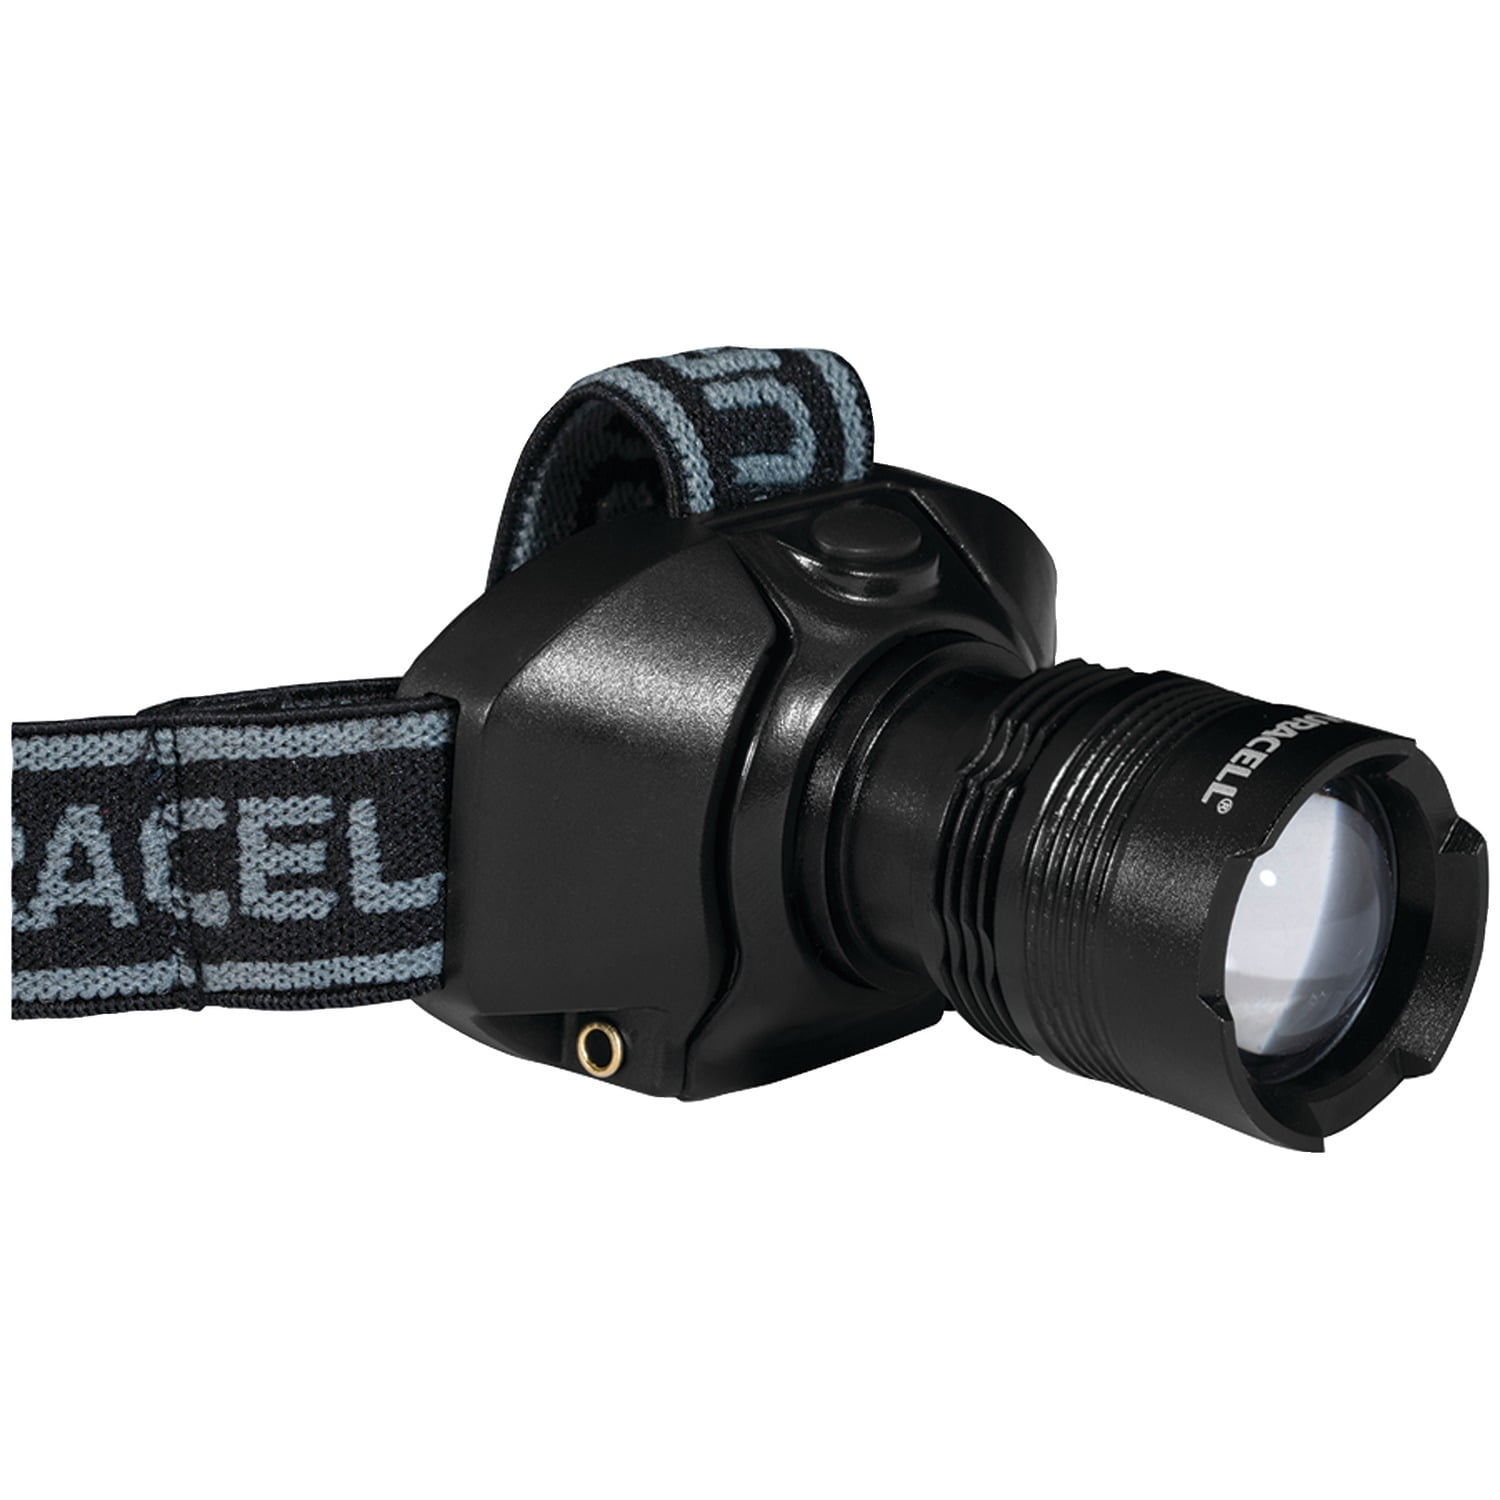 Duracell Explorer HDL-1 LED Head Torch